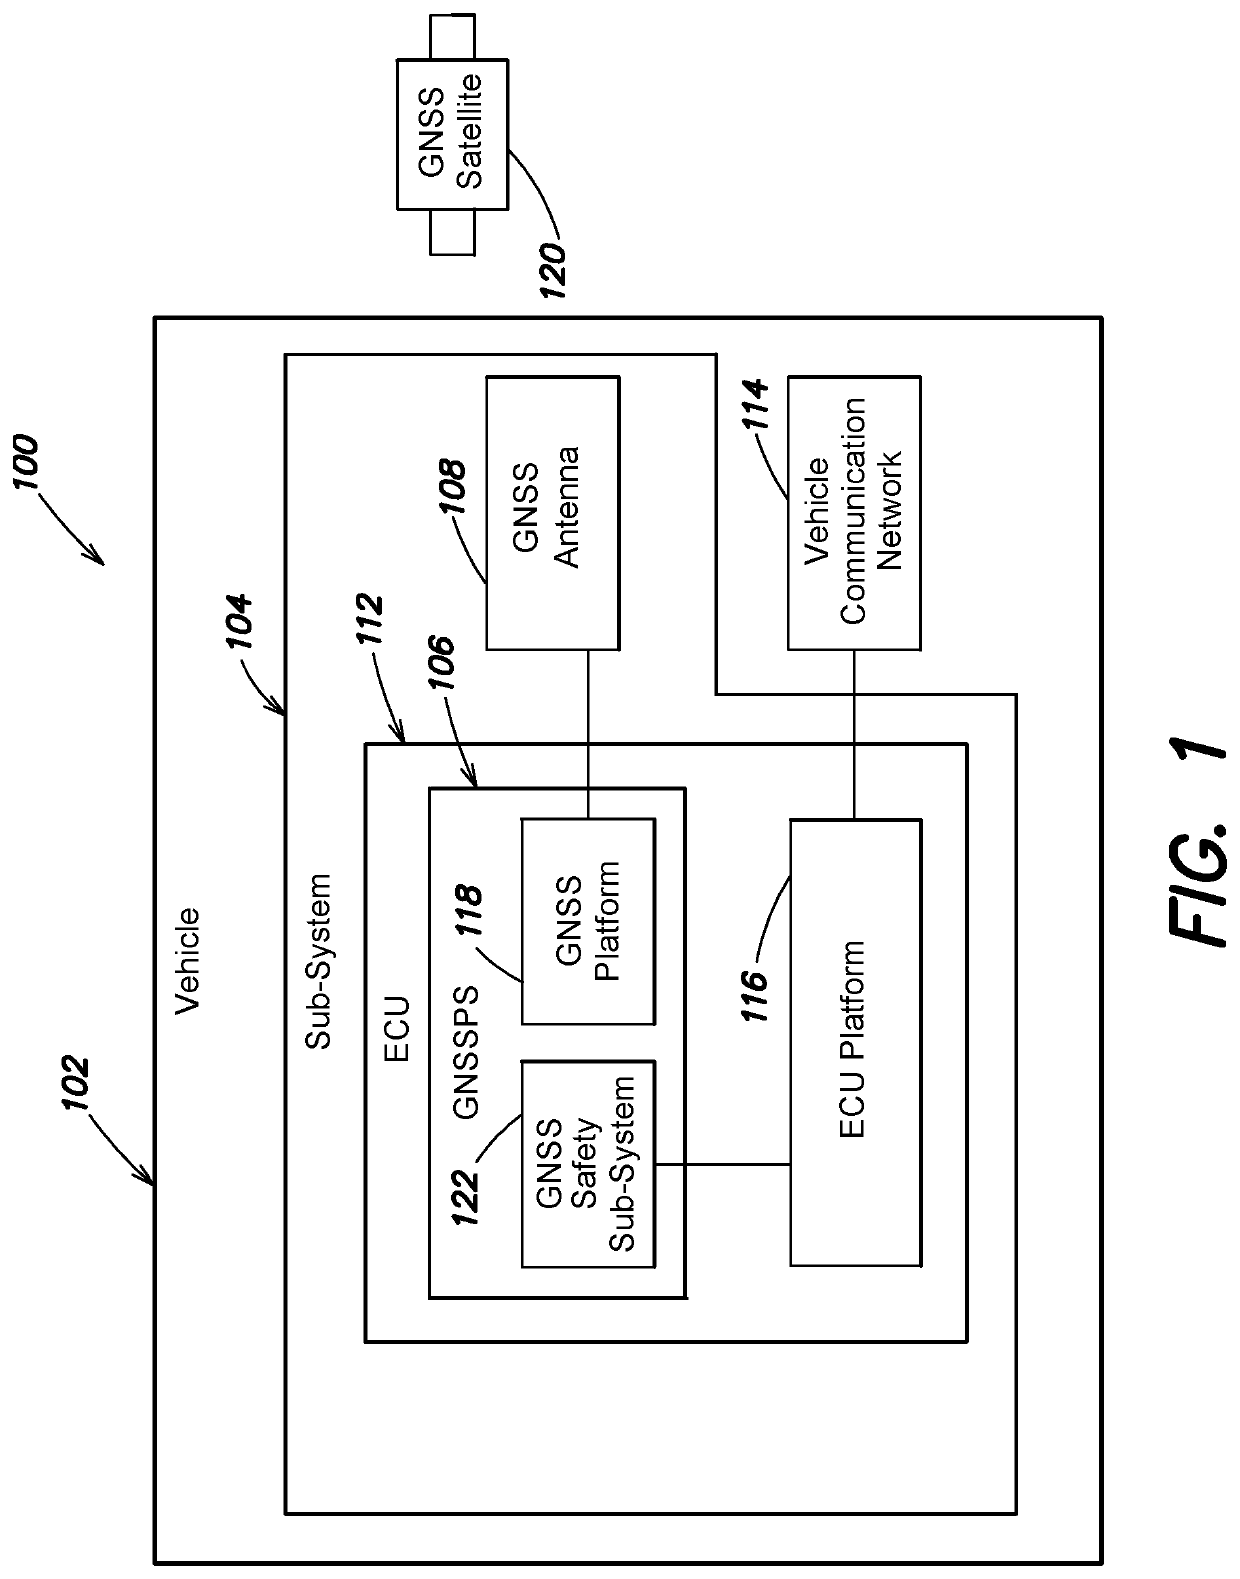 System and method to provide an ASIL qualifier for GNSS position and related values